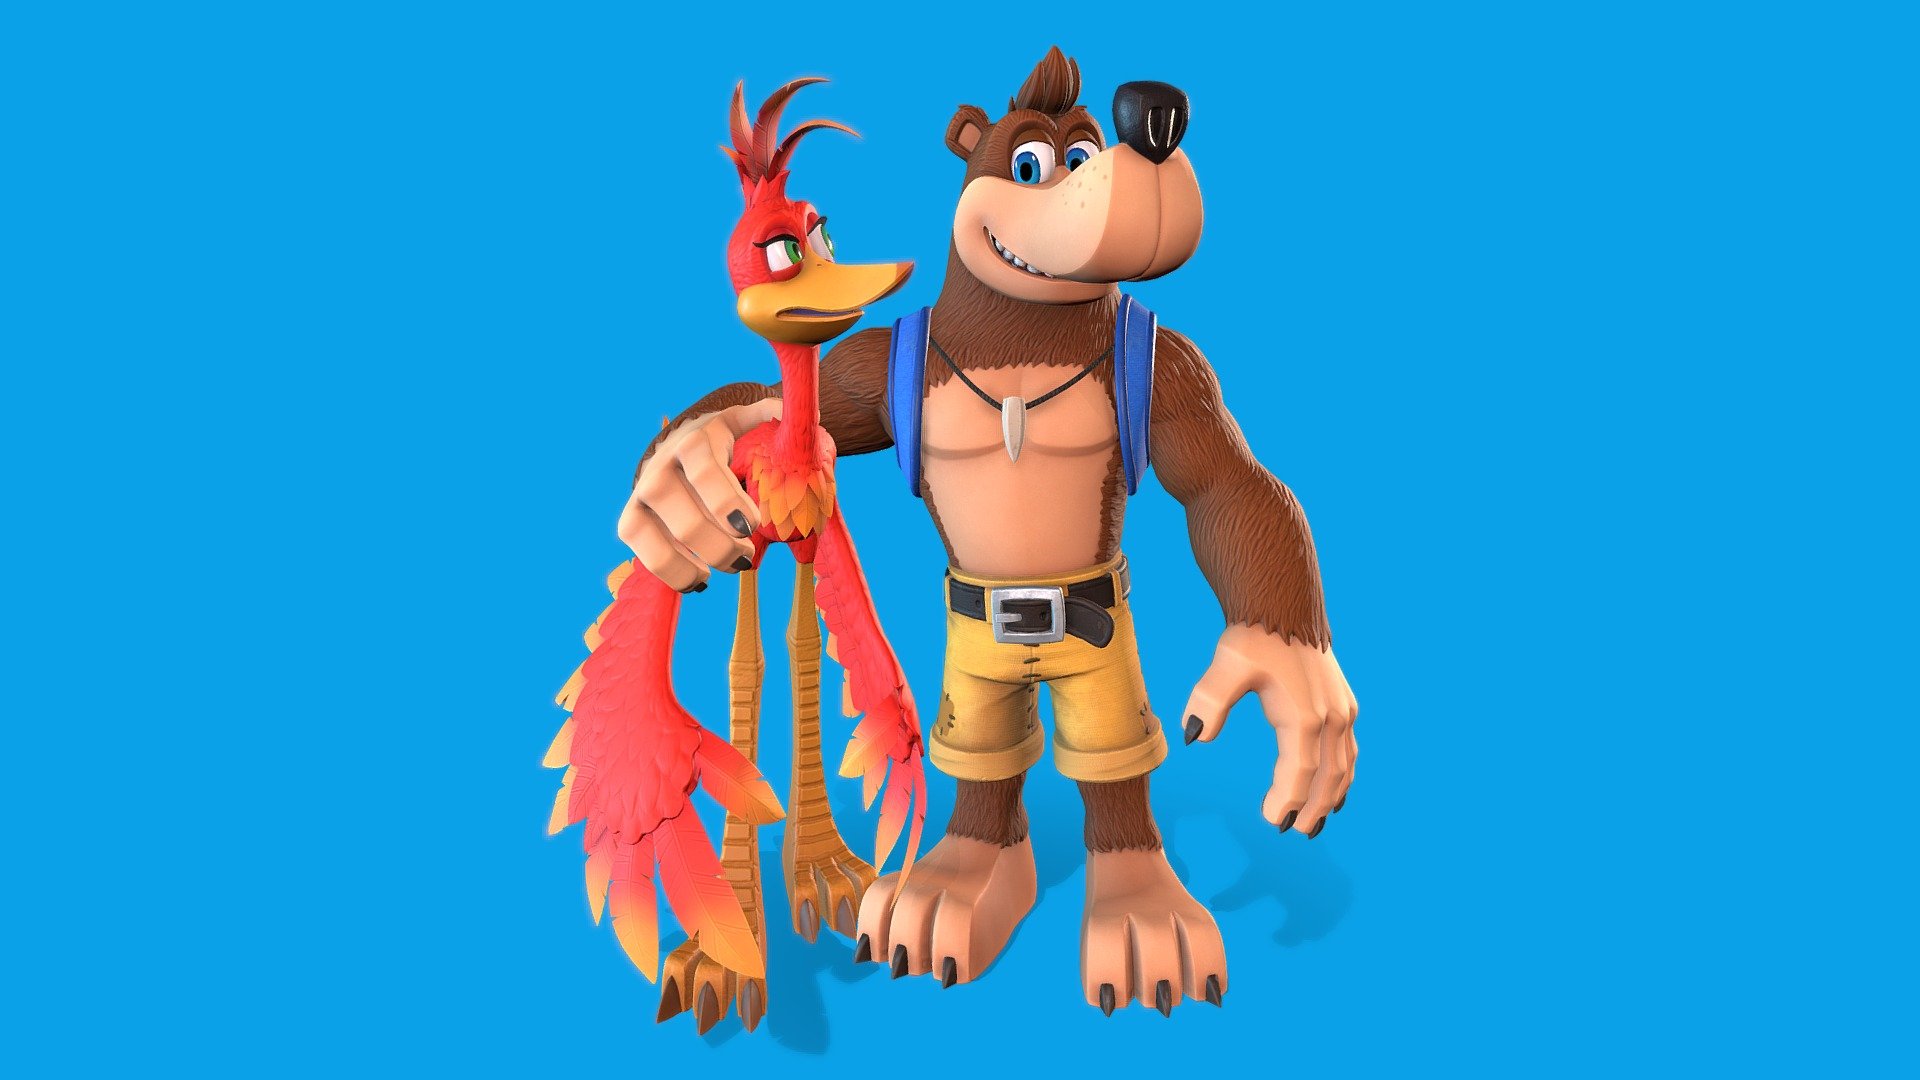 This is a kinda weird concept but what if someone made a mod for Banjo- Kazooie where they remake Nuts & Bolts but without the vehicle aspects.  Like missions/collectibles/dialogue/world but it's all sorta